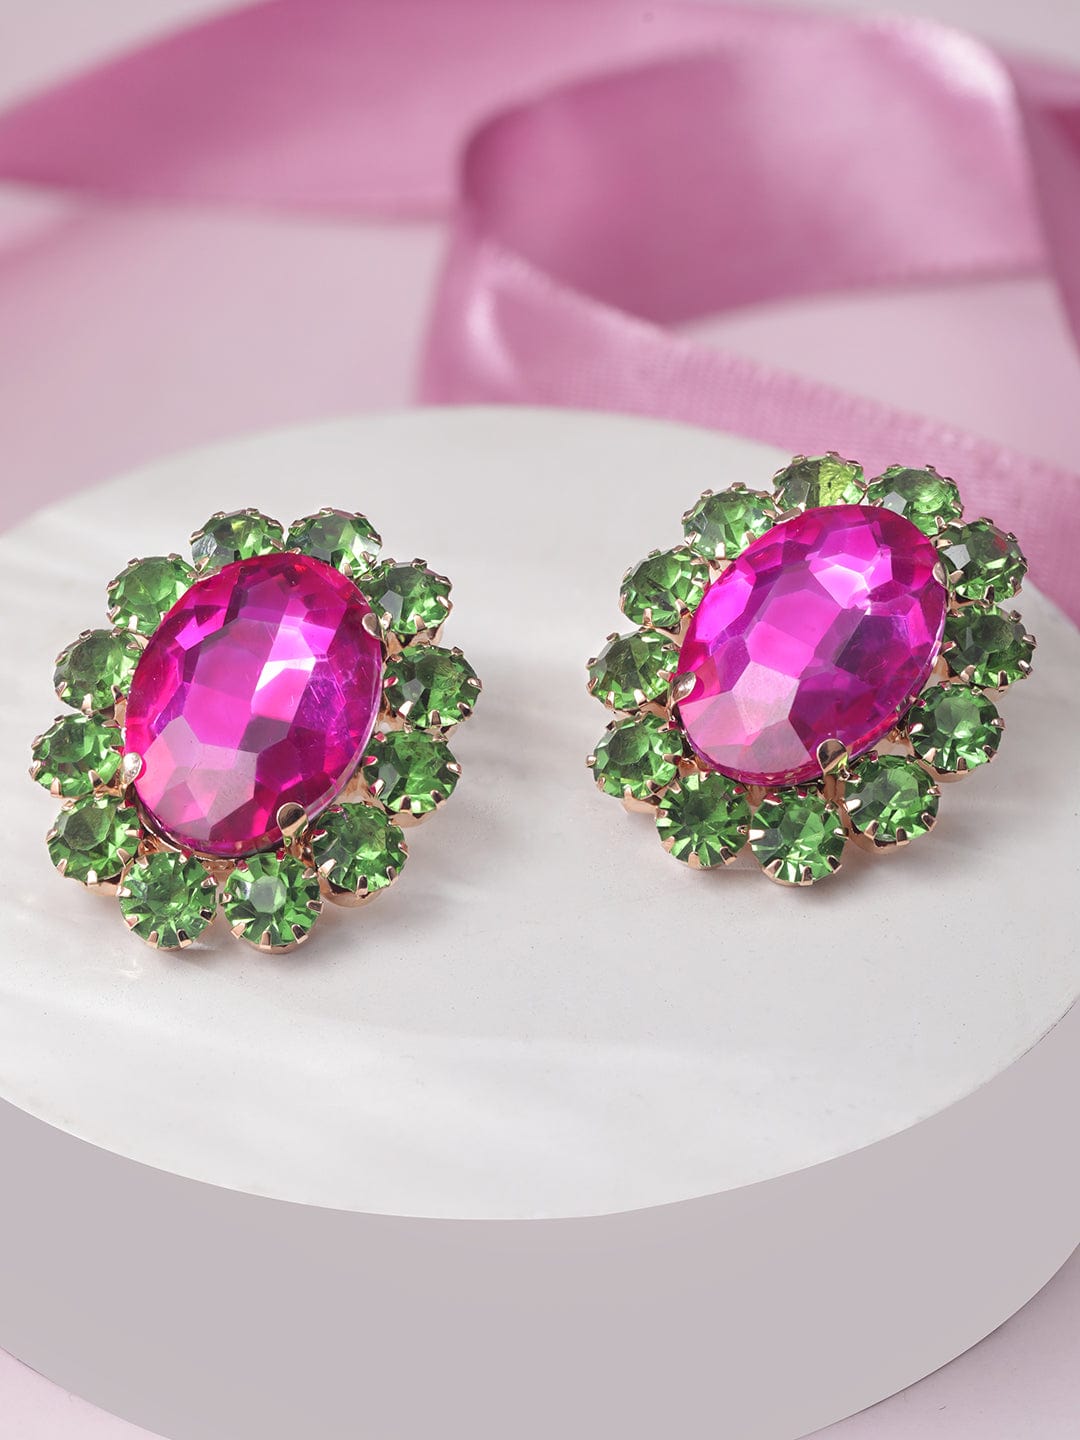 Enchanting Blossoms: Pink and Green AD Stud Earrings Earrings